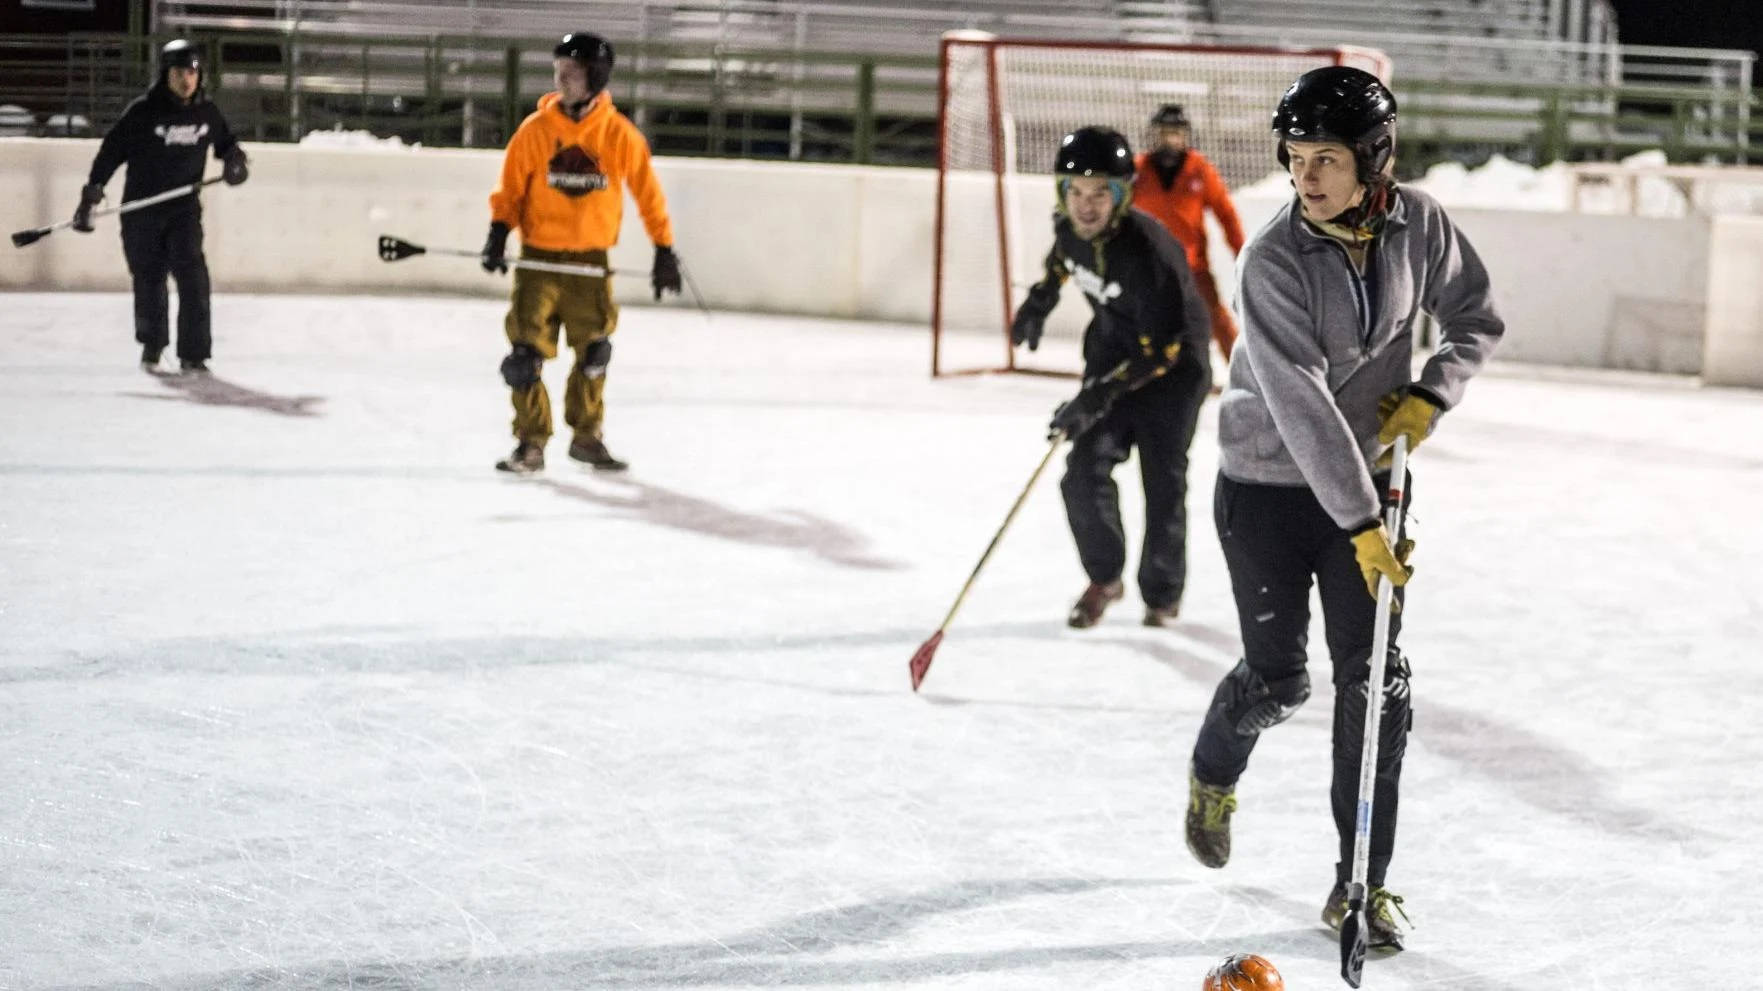 Fierce Woman Athlete in Competitive Broomball Game Wallpaper